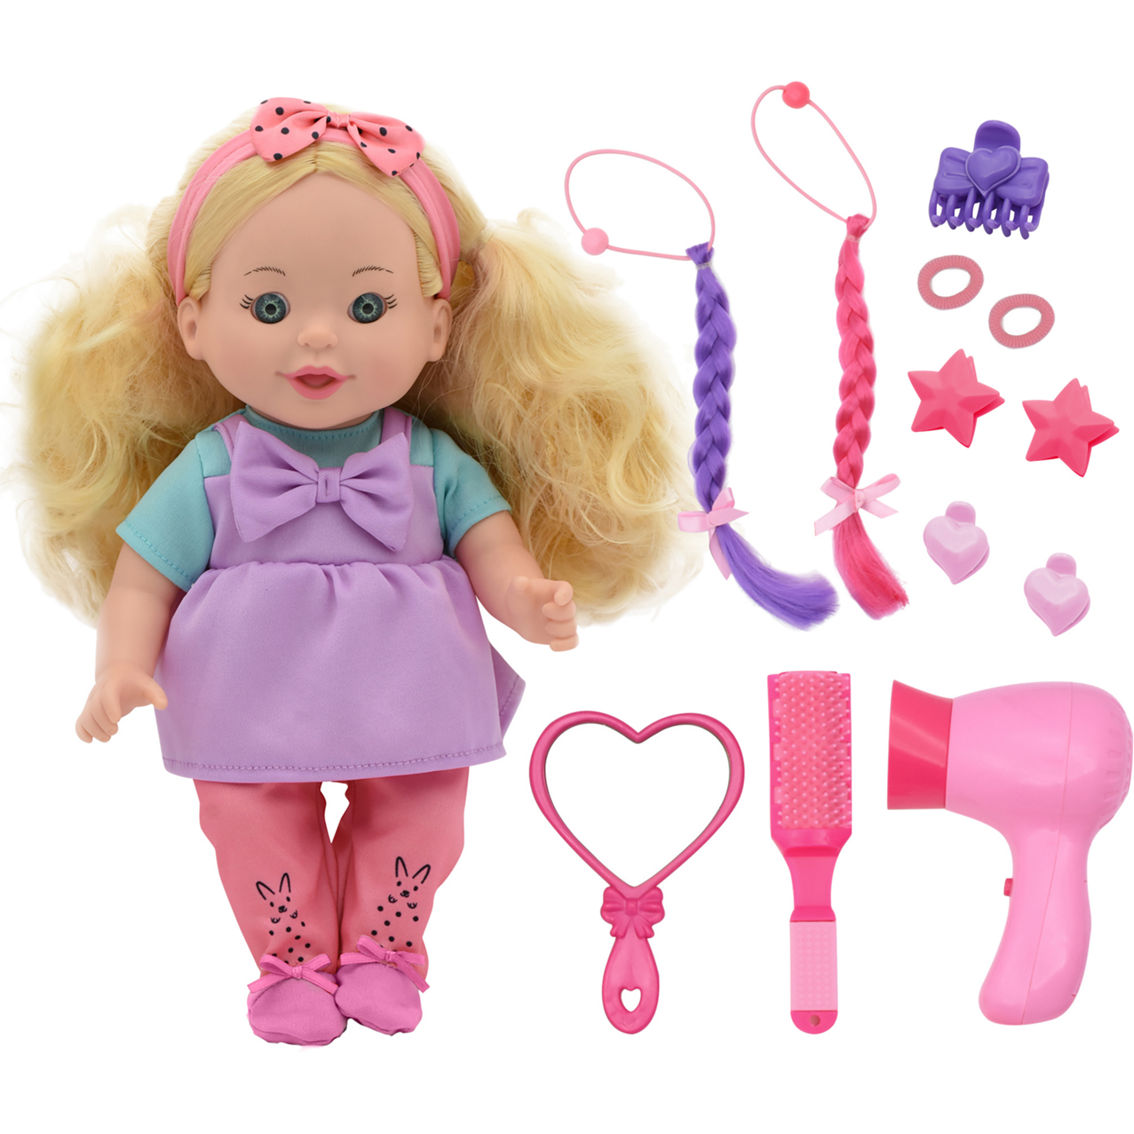 New Adventures Lil Tots: Talking Hair Styling 16 pc. Playset with Doll - Image 2 of 7